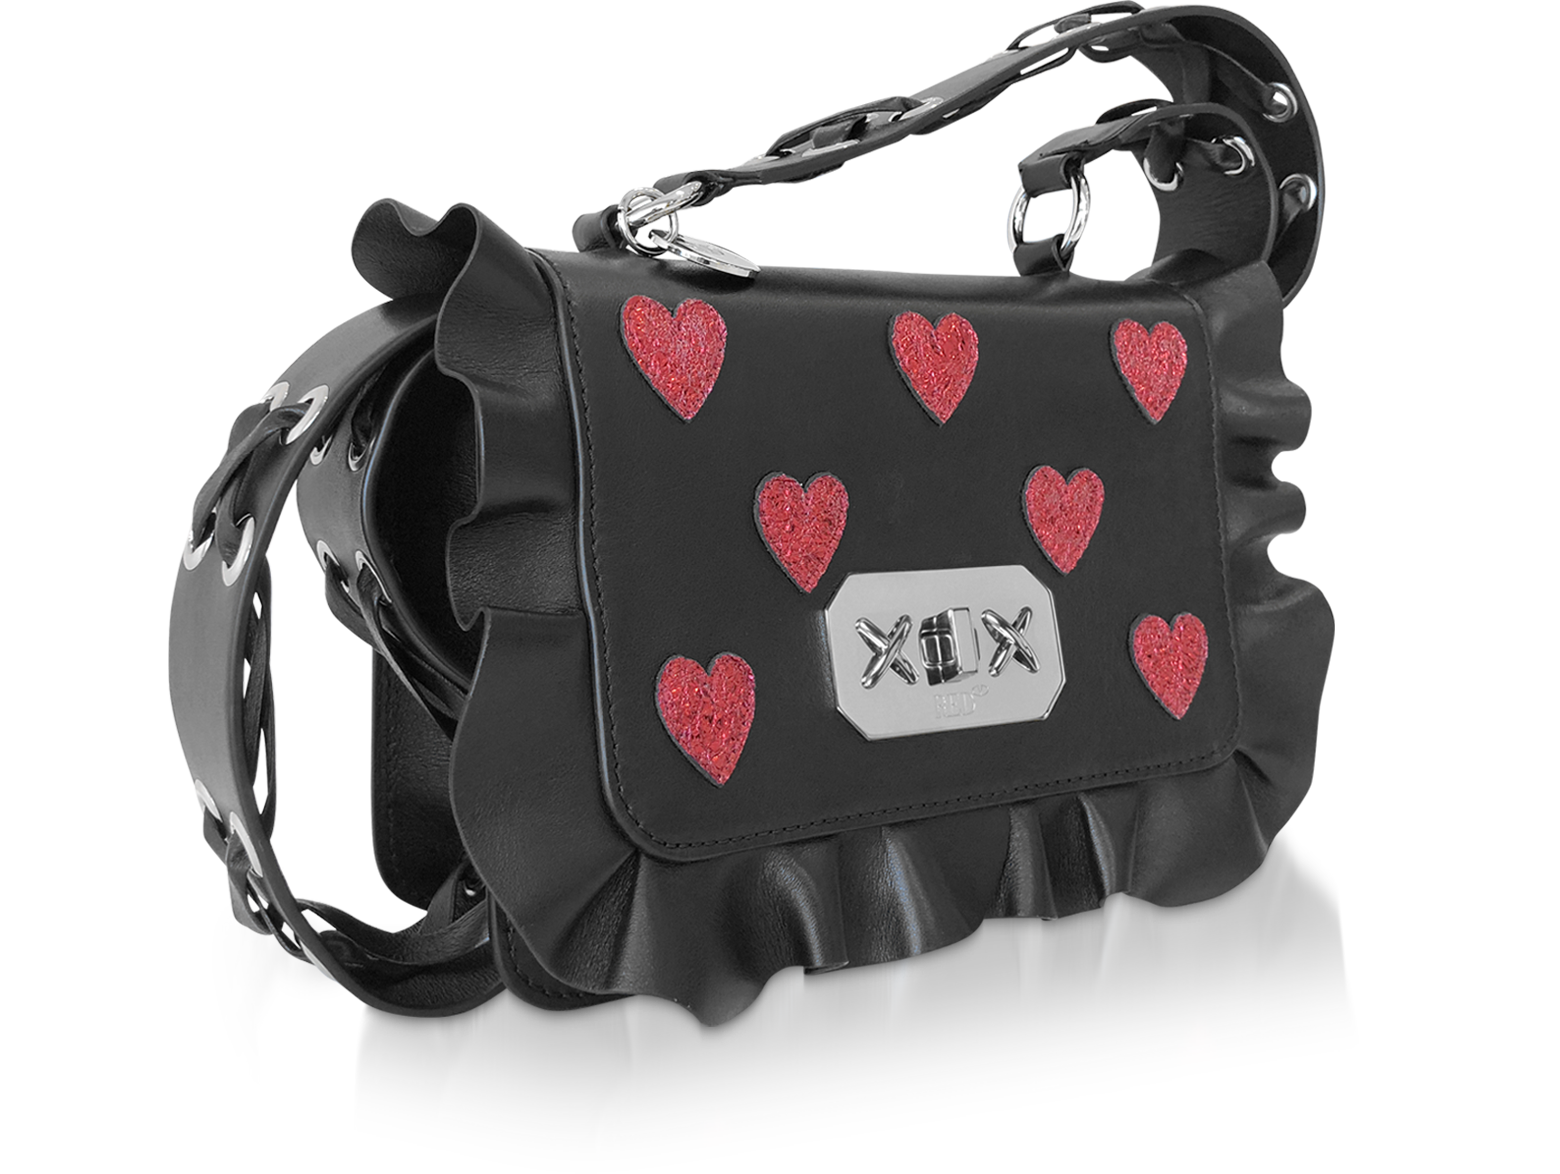 RED Valentino Rock Ruffles Red Leather Crossbody/Belt Bag at FORZIERI